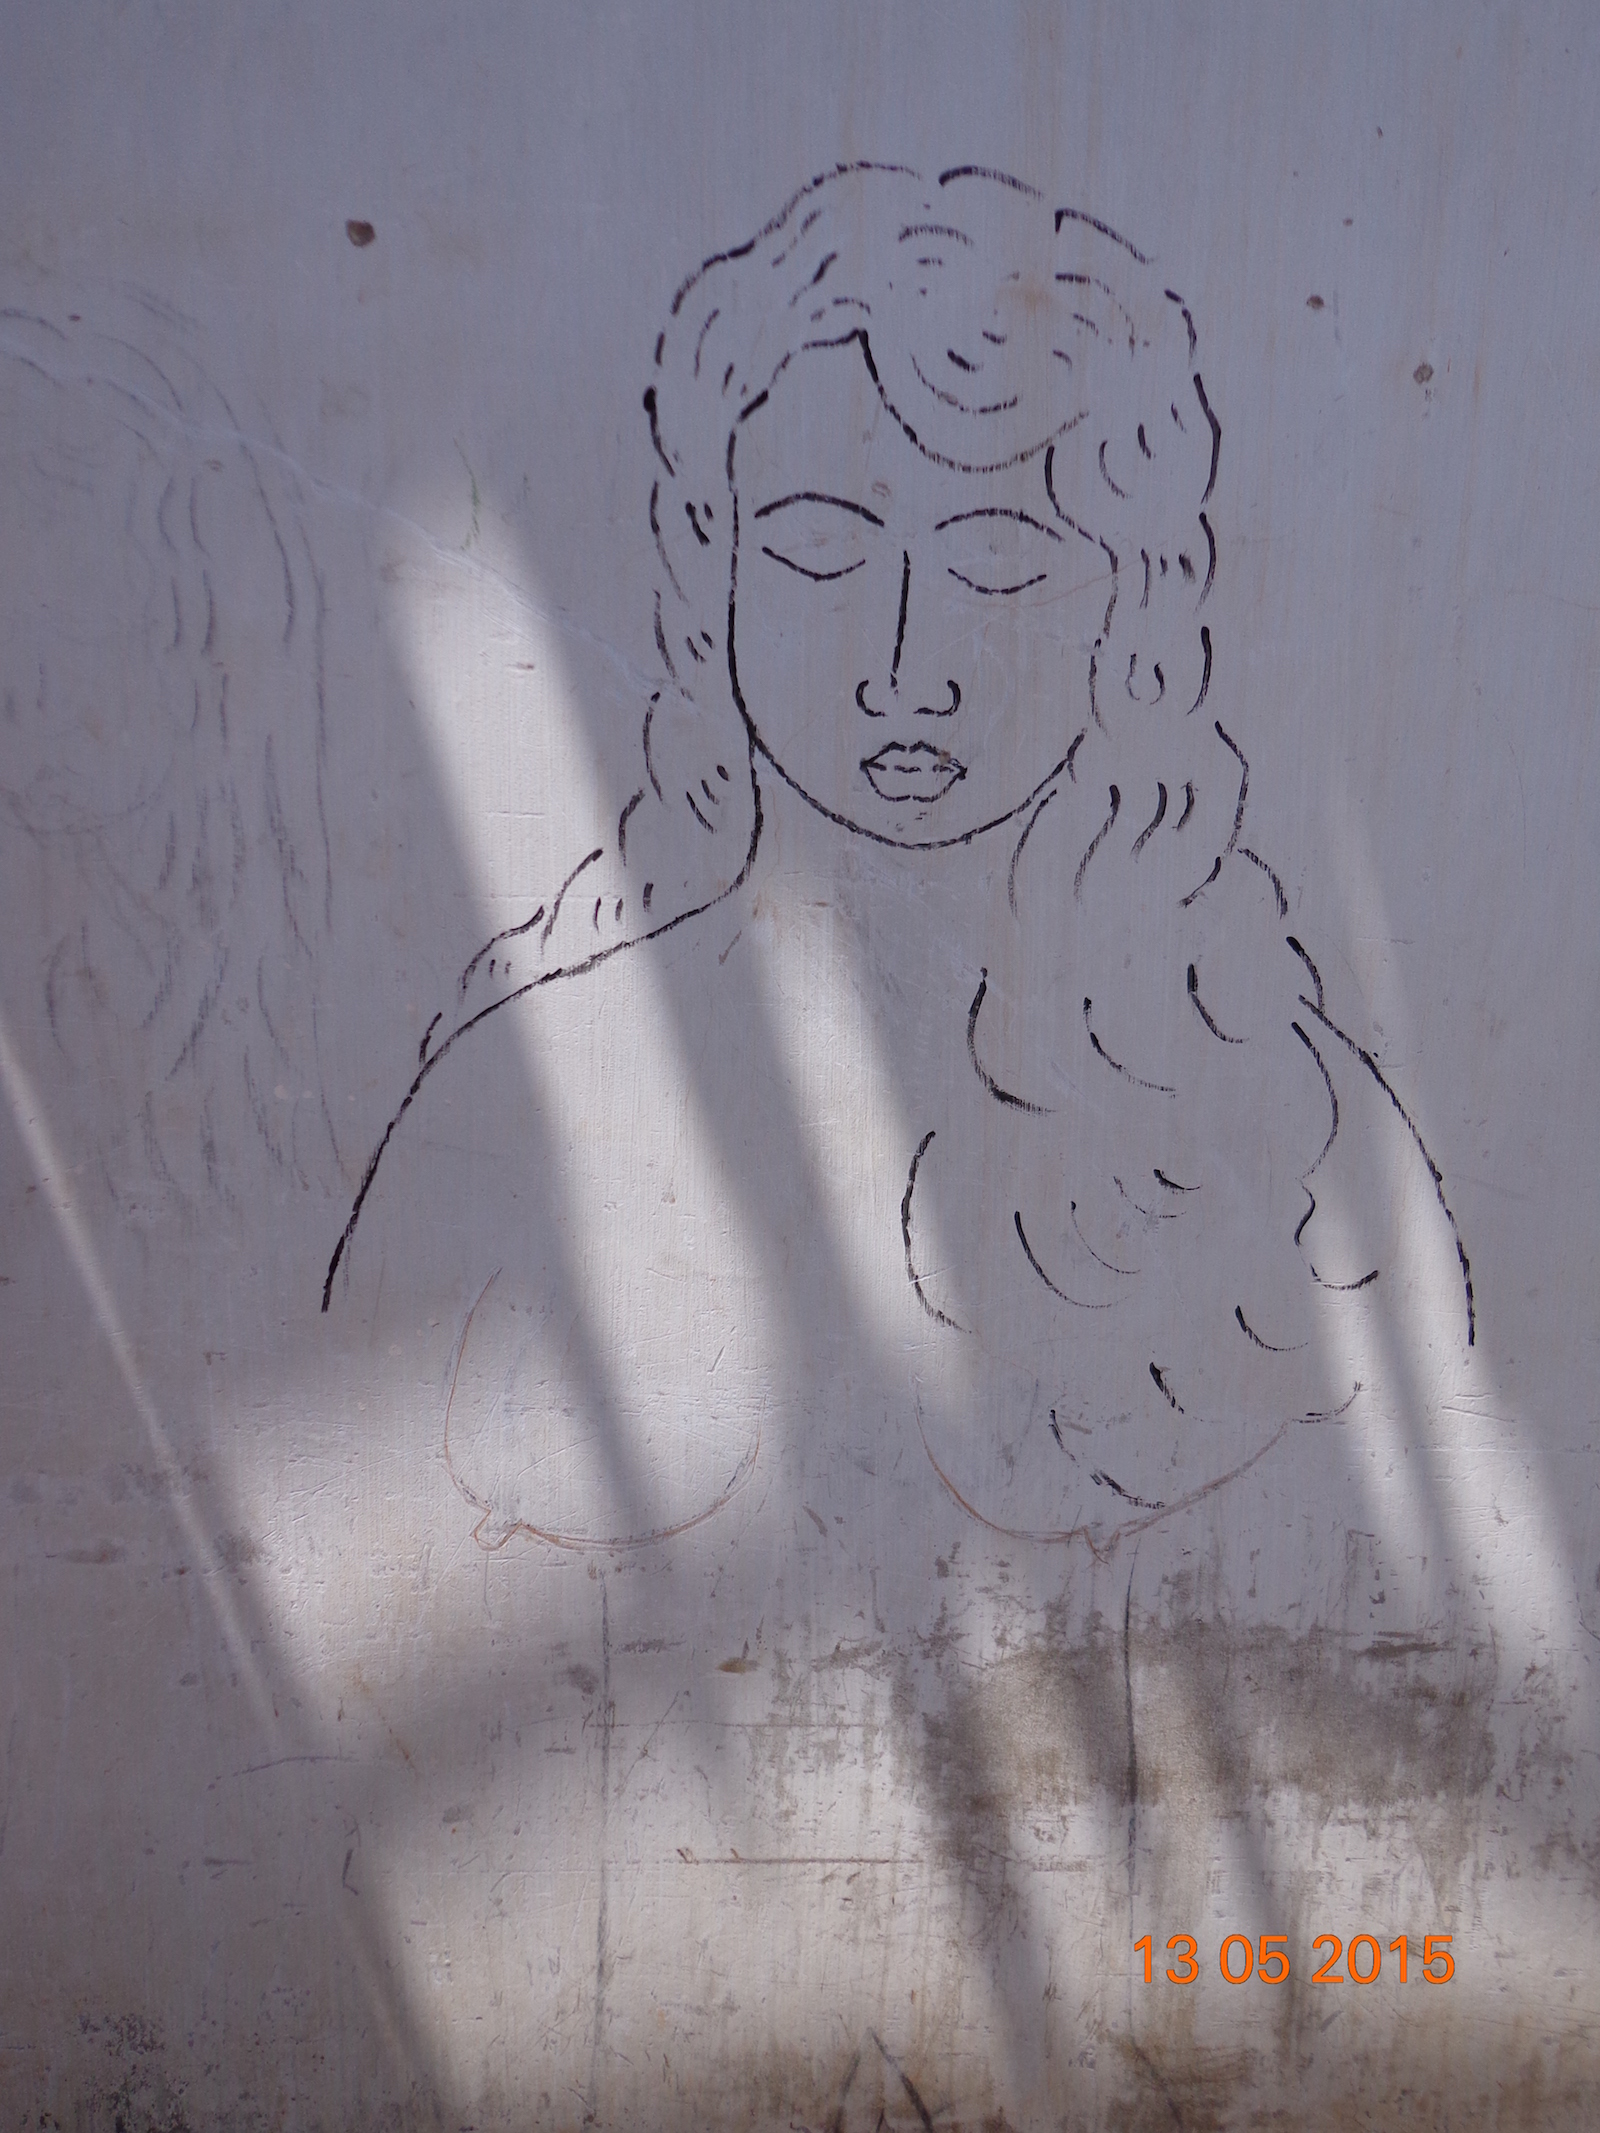 Drawings on walls of damaged houses-2